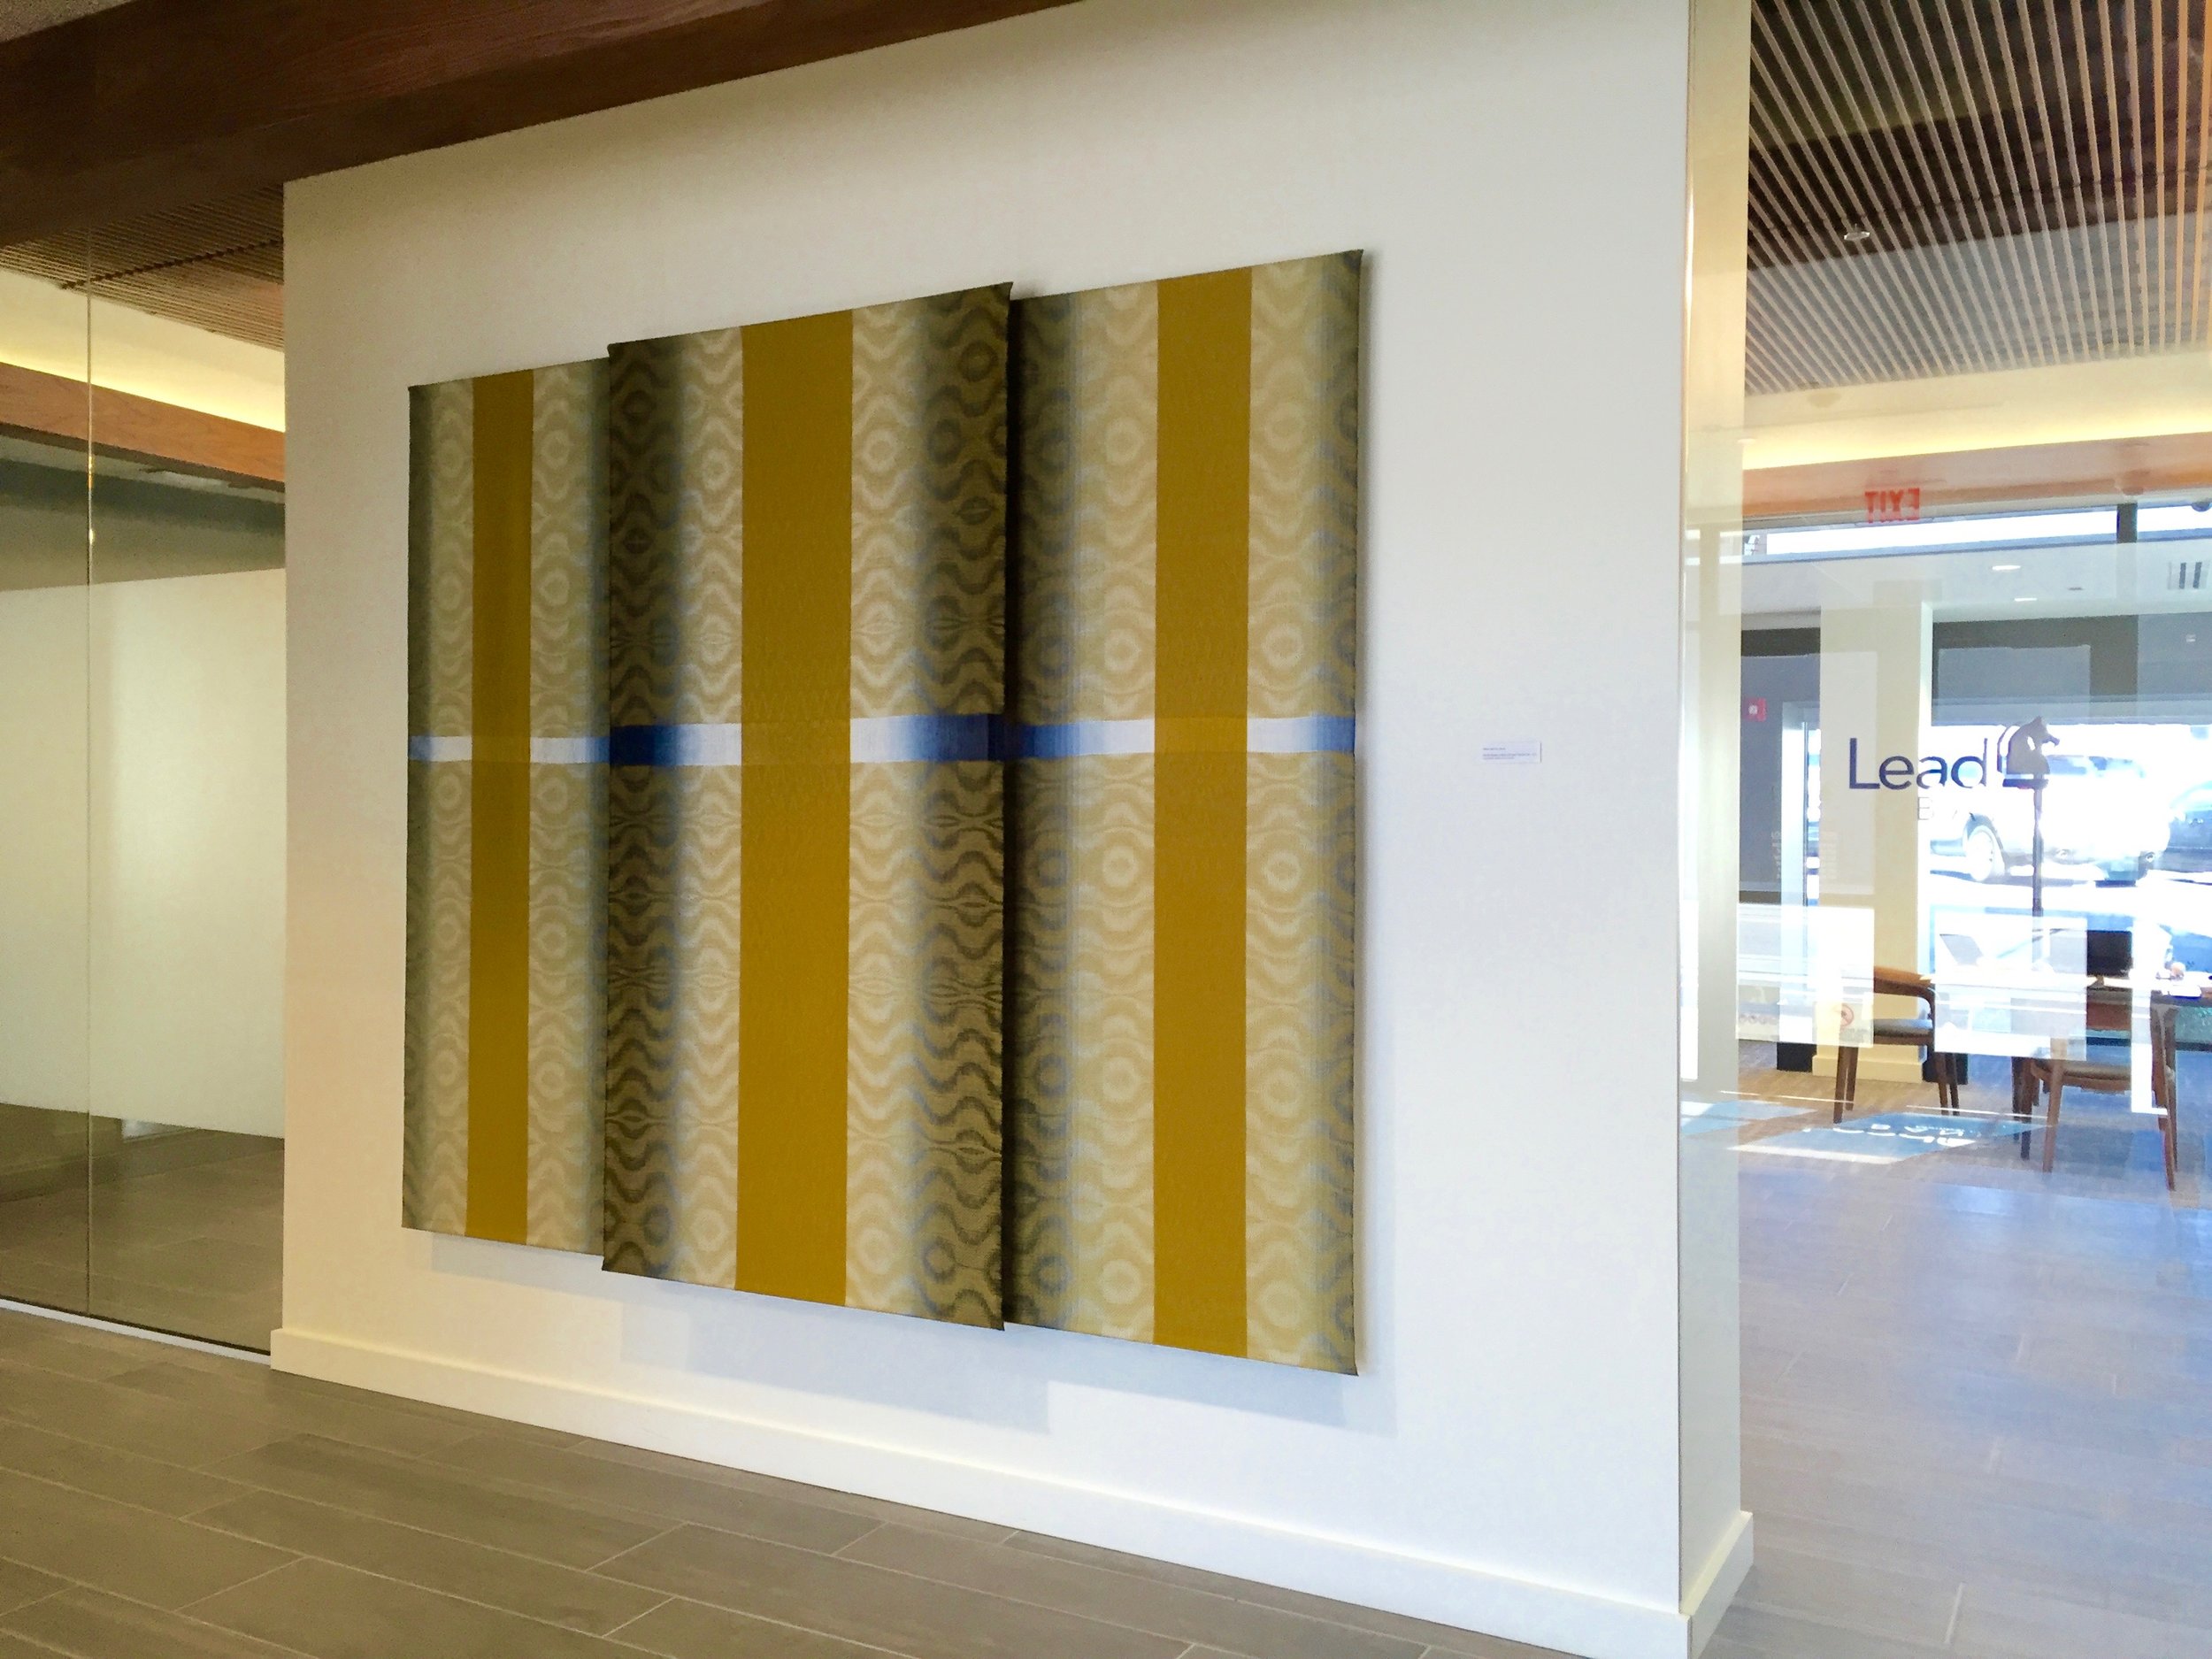  Woven Shades of Blue with Gold Triptych Art  Lead Bank in the Crossroads  Kansas City, MO    